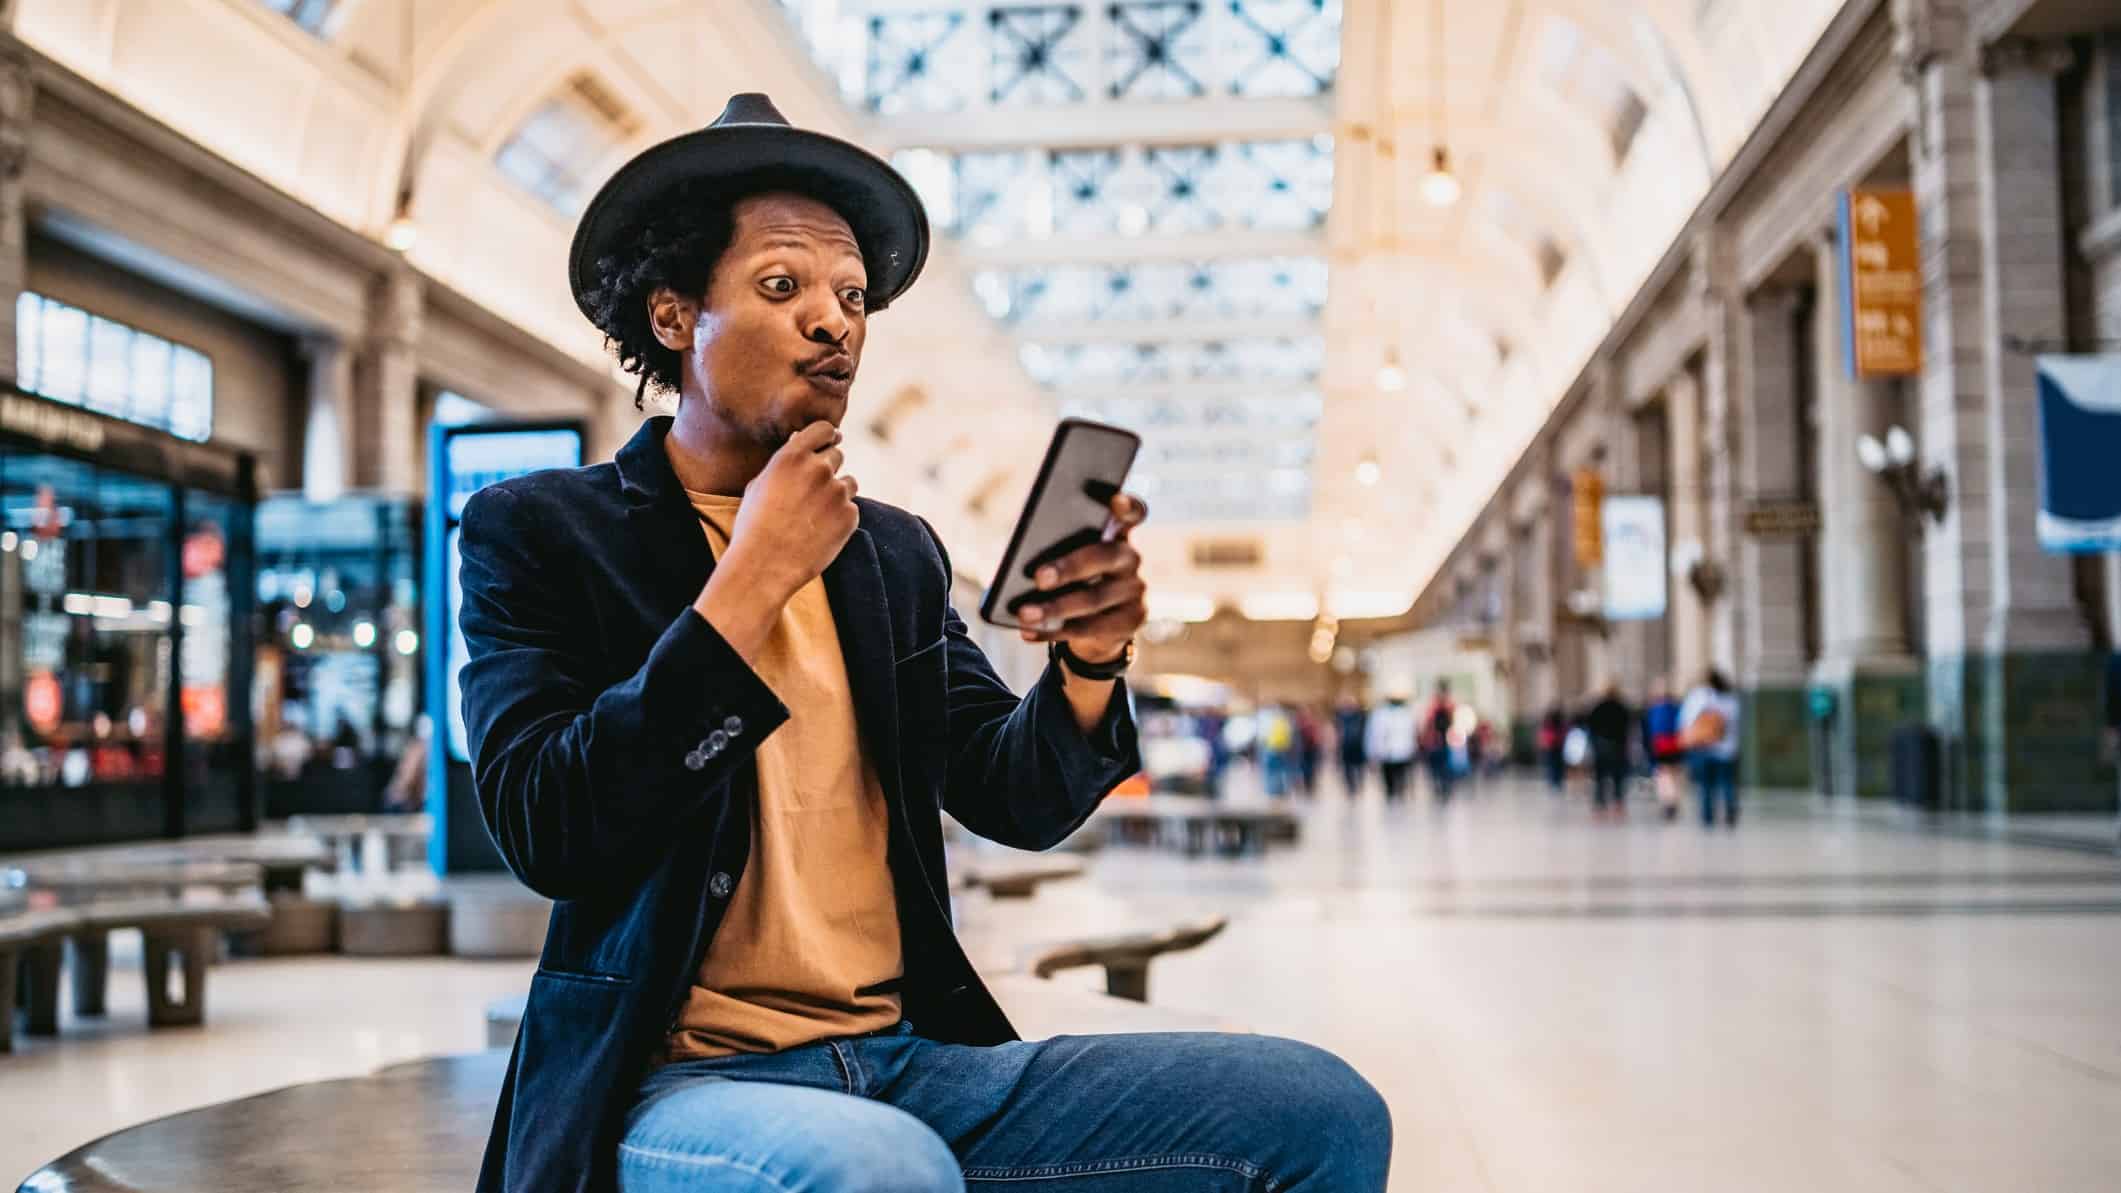 A man in trendy clothing sits on a bench in a shopping mall looking at his phone with interest and a surprised look on his face.